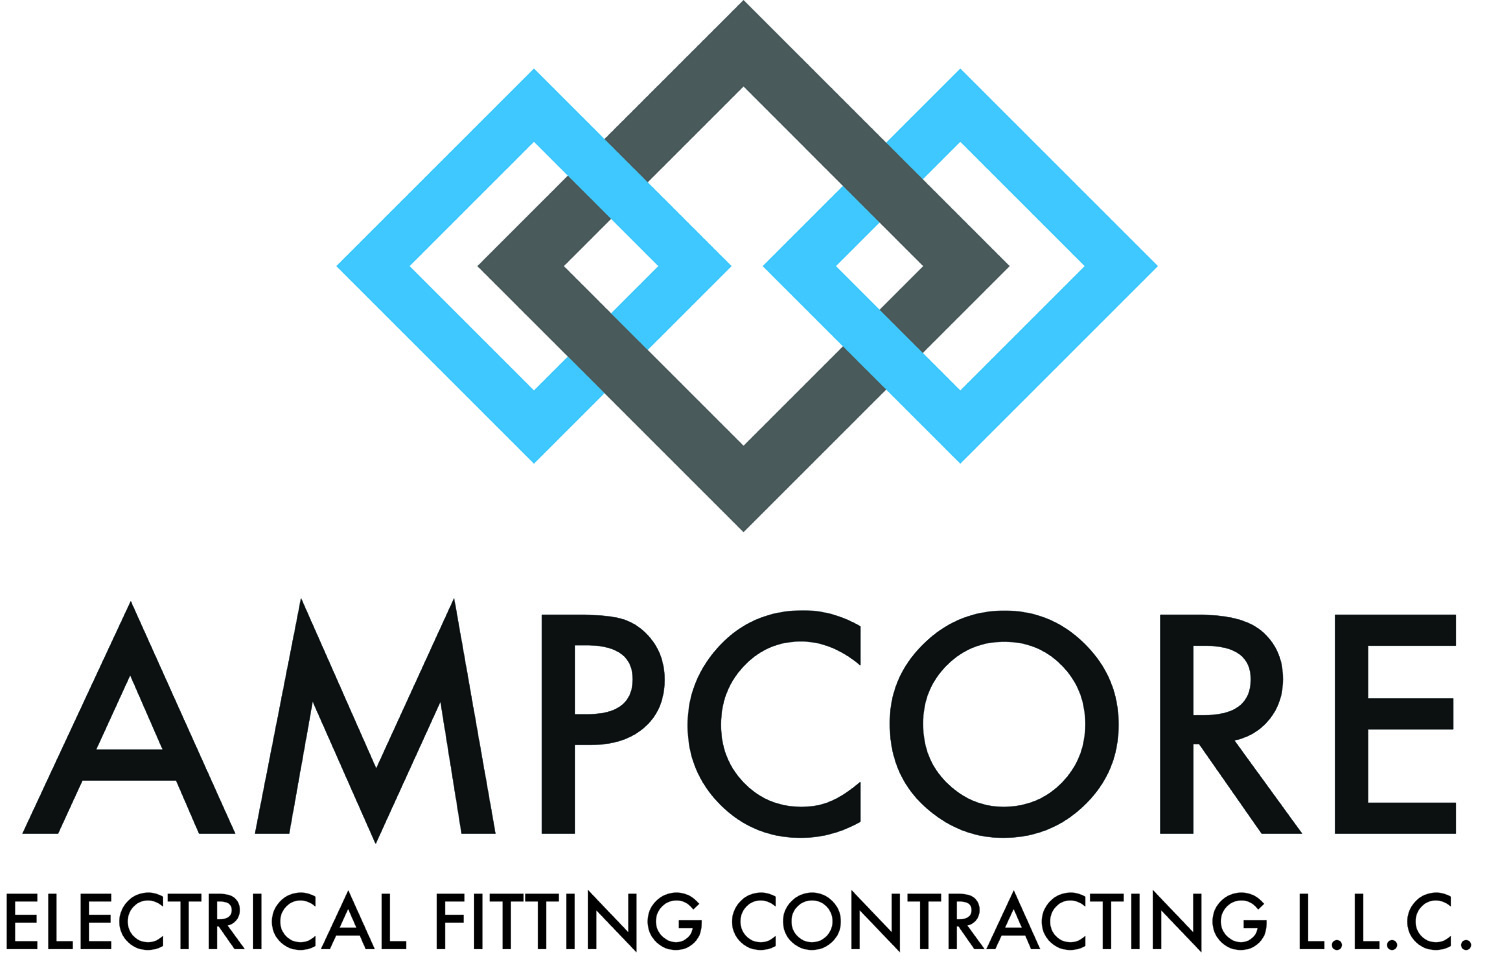 Ampcore Electrical Fitting Contracting L.L.C